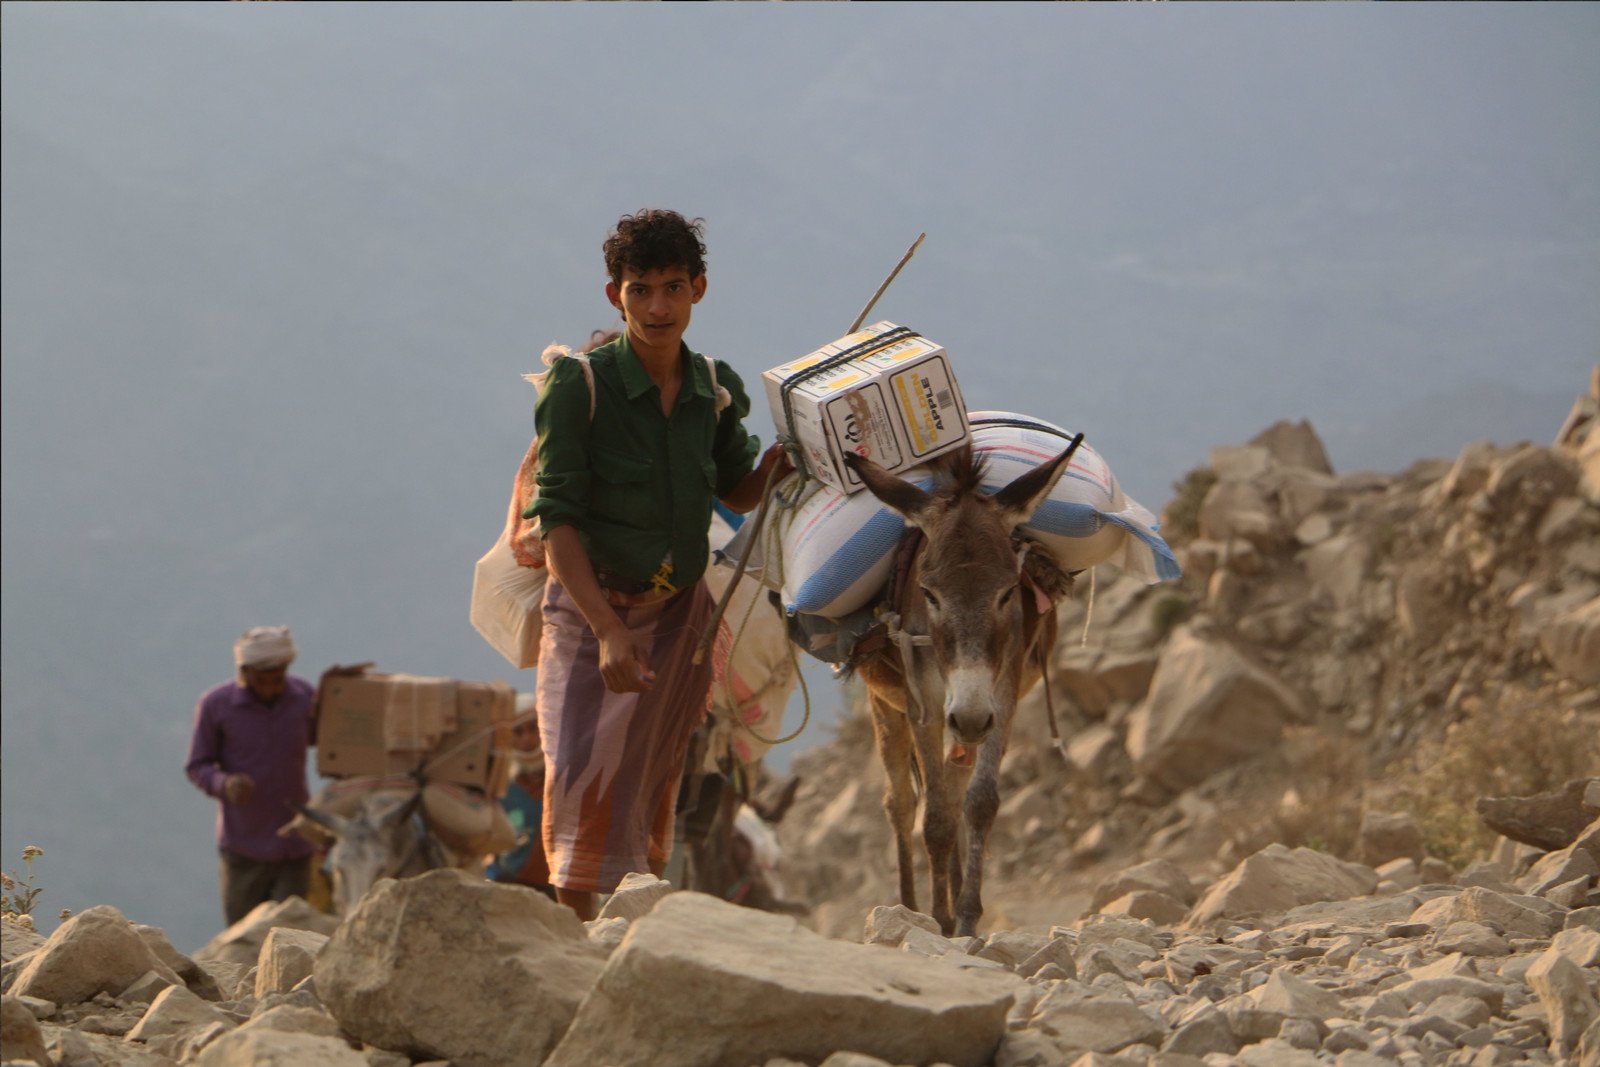 A man transports food by donkey across the mountain to areas of Taiz cut off from many supplies. Traders in Taiz said that higher prices in active combat areas sometimes mean people are forced to travel long distances outside of the city to purchase commodities at a lower price. Many travel along treacherous mountain paths in order to avoid checkpoints. They return with the food ‘on their backs, exposing themselves to the risk of being shot by snipers’, one trader told Oxfam.